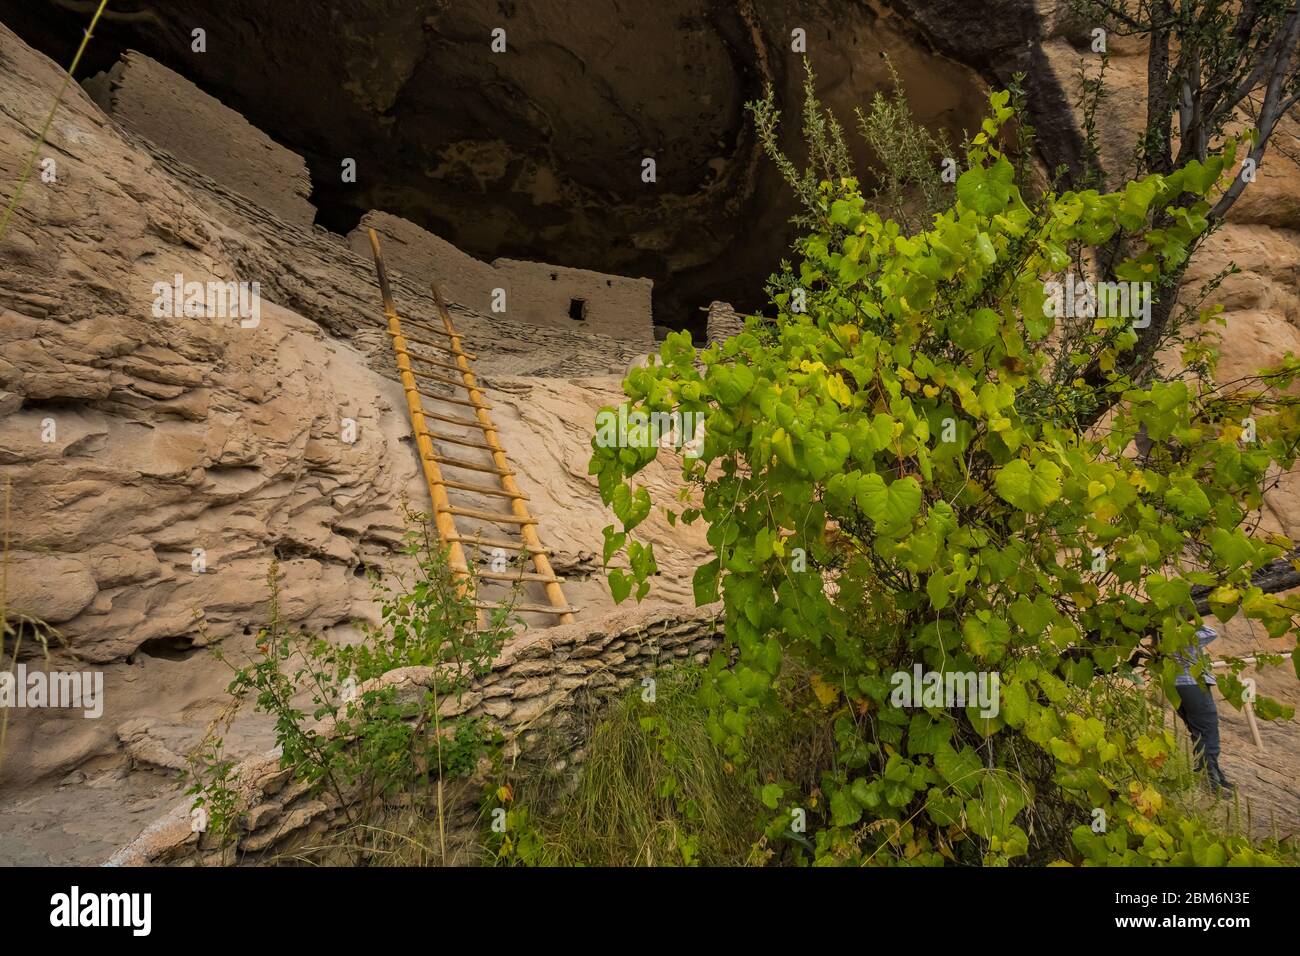 Cave cliff dwellings of ancient Mogollon Pueblo people in Gila Cliff Dwellings National Monument, New Mexico, USA Stock Photo